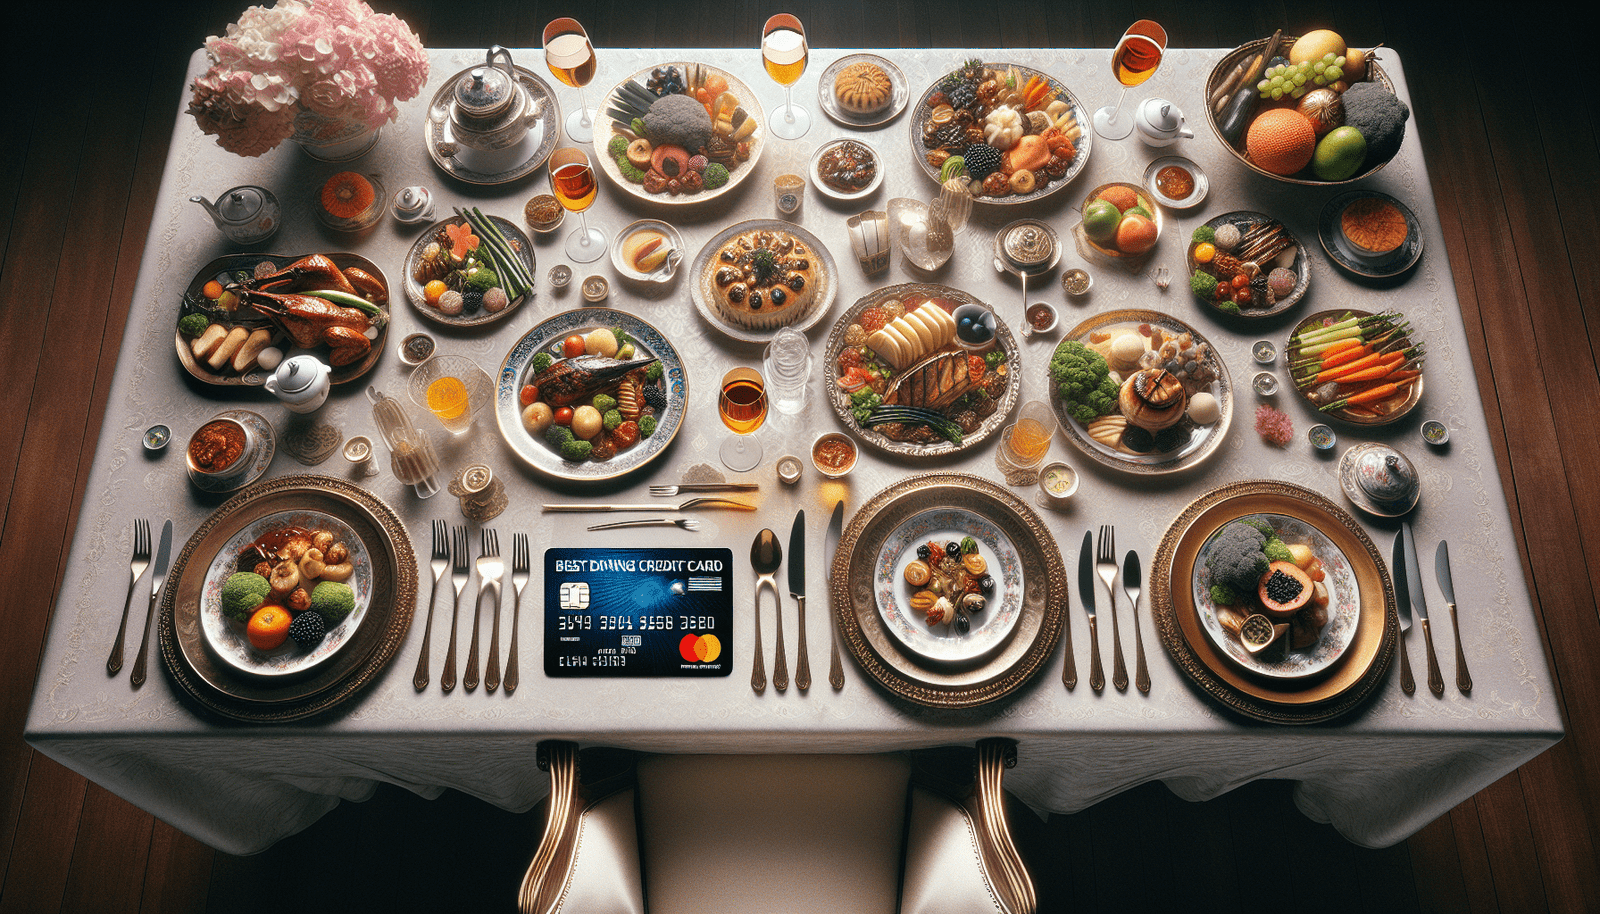 How To Get The Most Out Of The Best Dining Credit Card In Malaysia